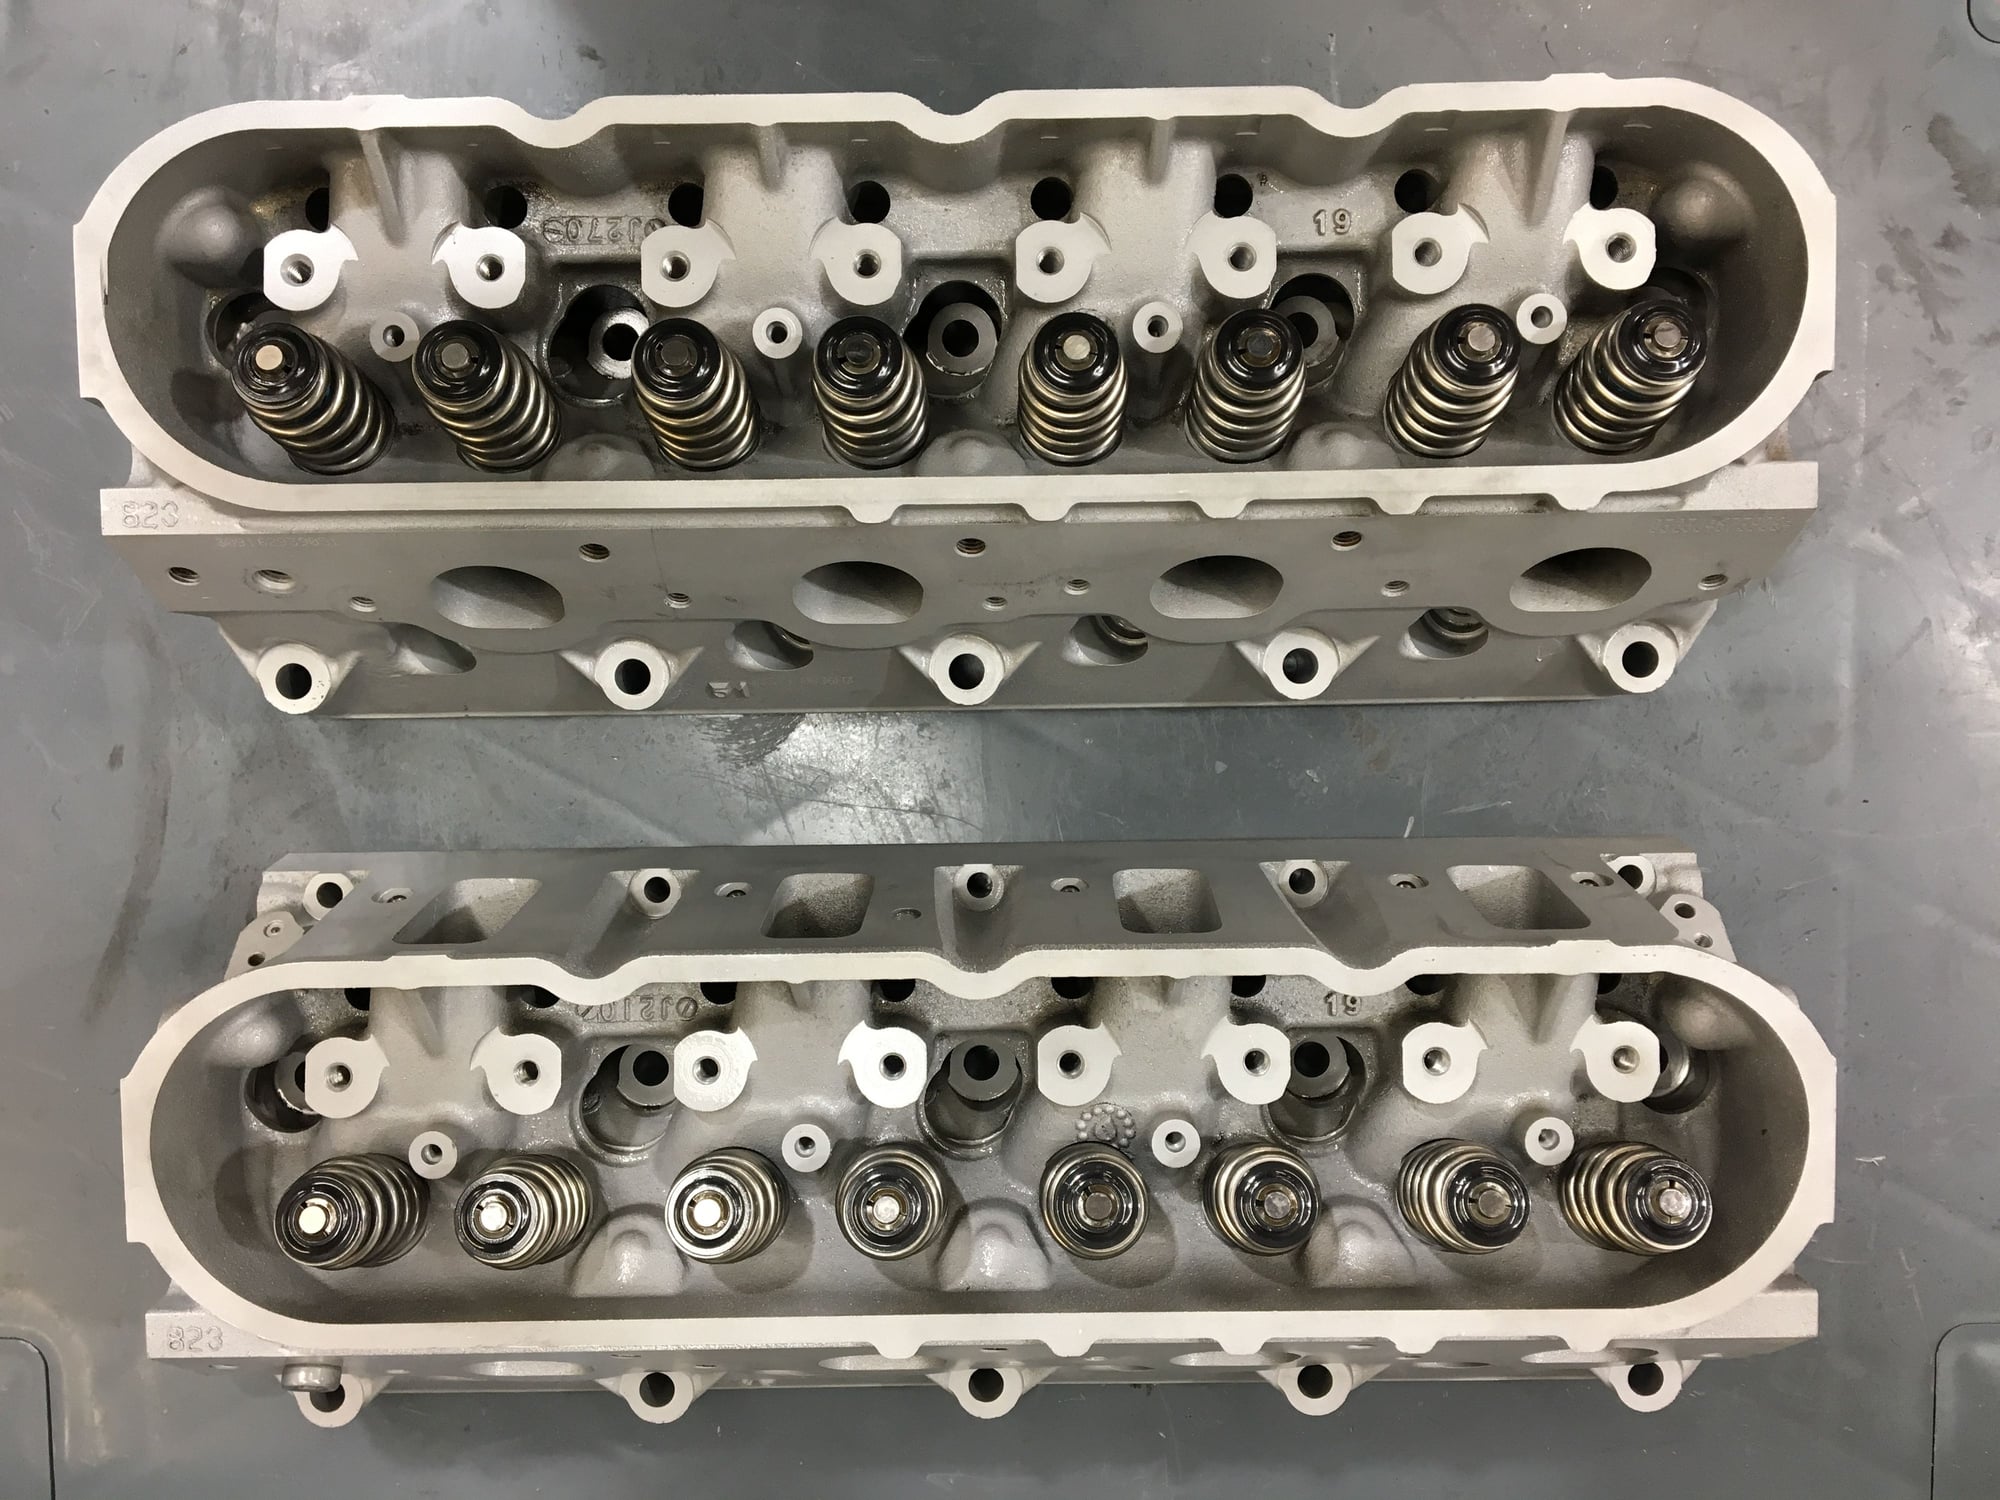  - Ls3 L92 heads fresh from machine shop with .625 springs - Houston, TX 77065, United States